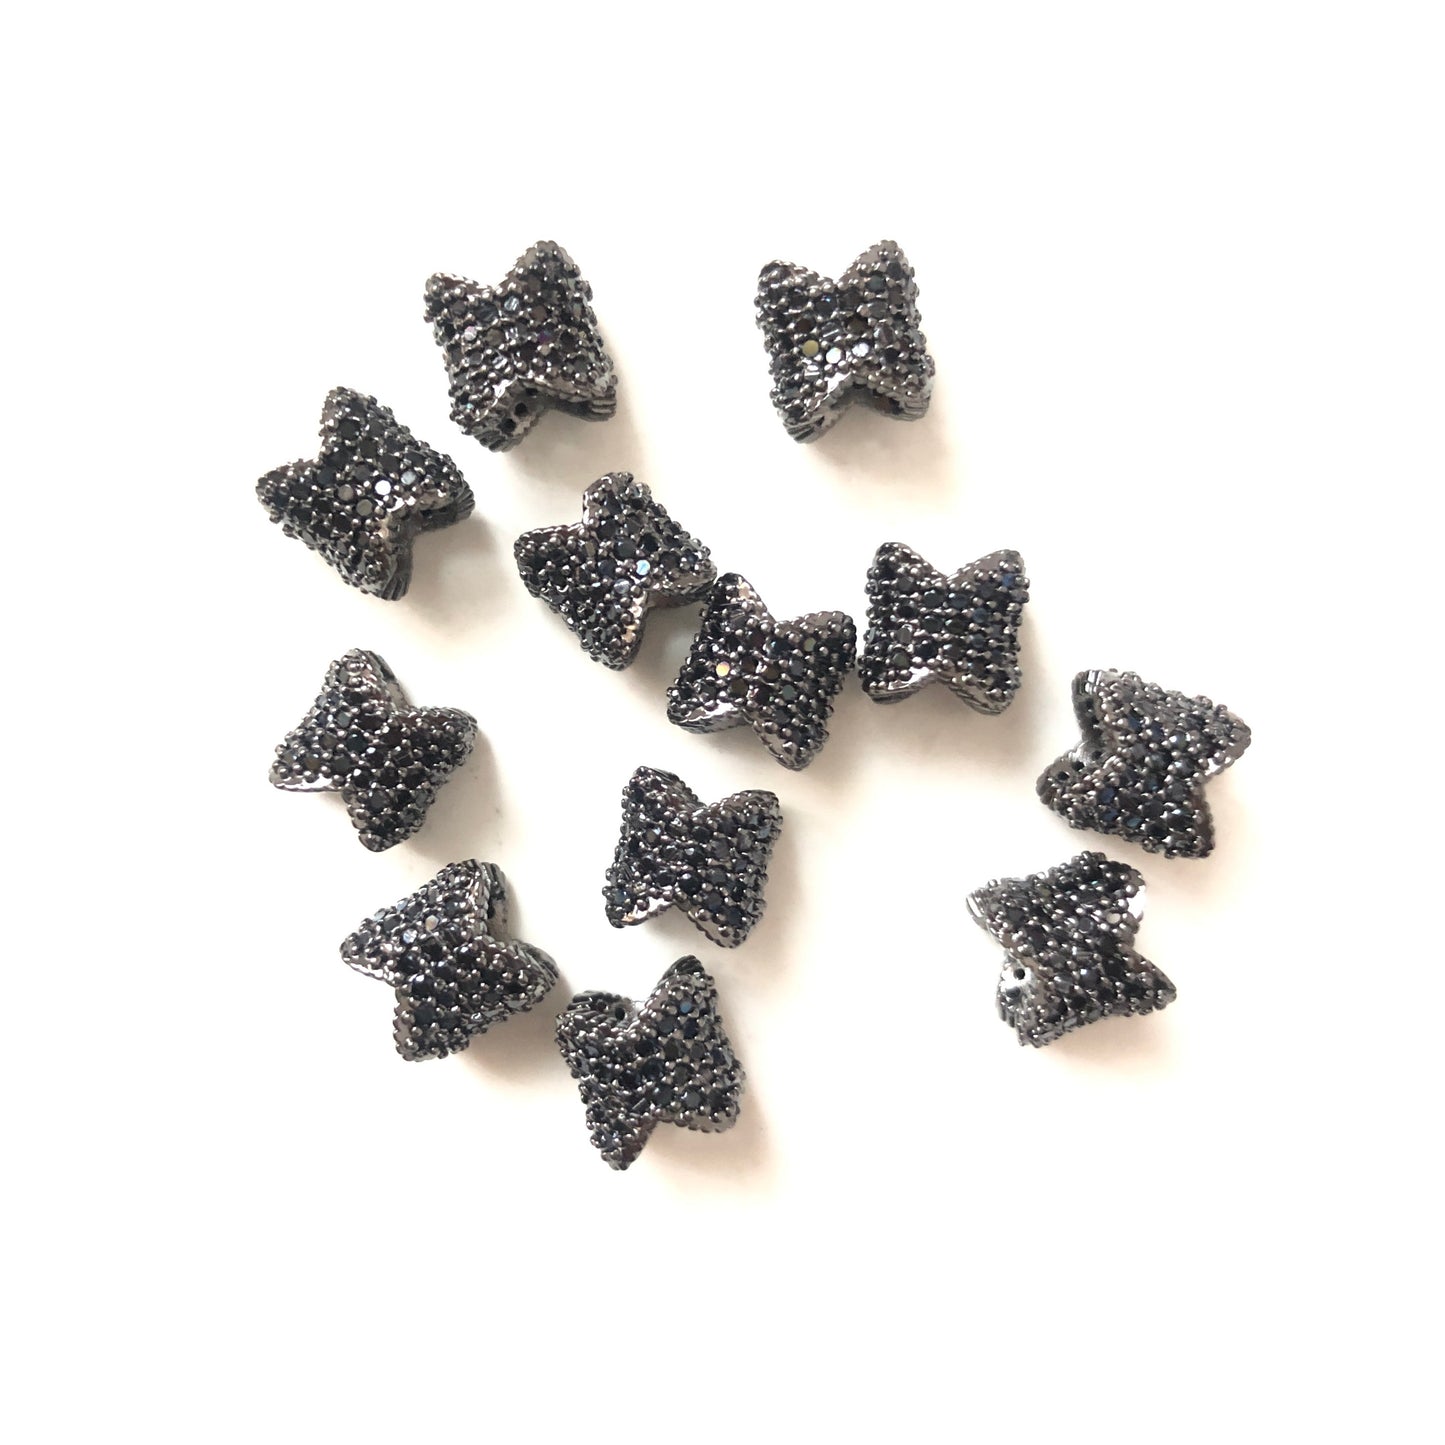 20pcs/lot 8*6.8mm CZ Paved Flower Tube Spacers Black on Black CZ Paved Spacers Tube Bar Centerpieces Charms Beads Beyond